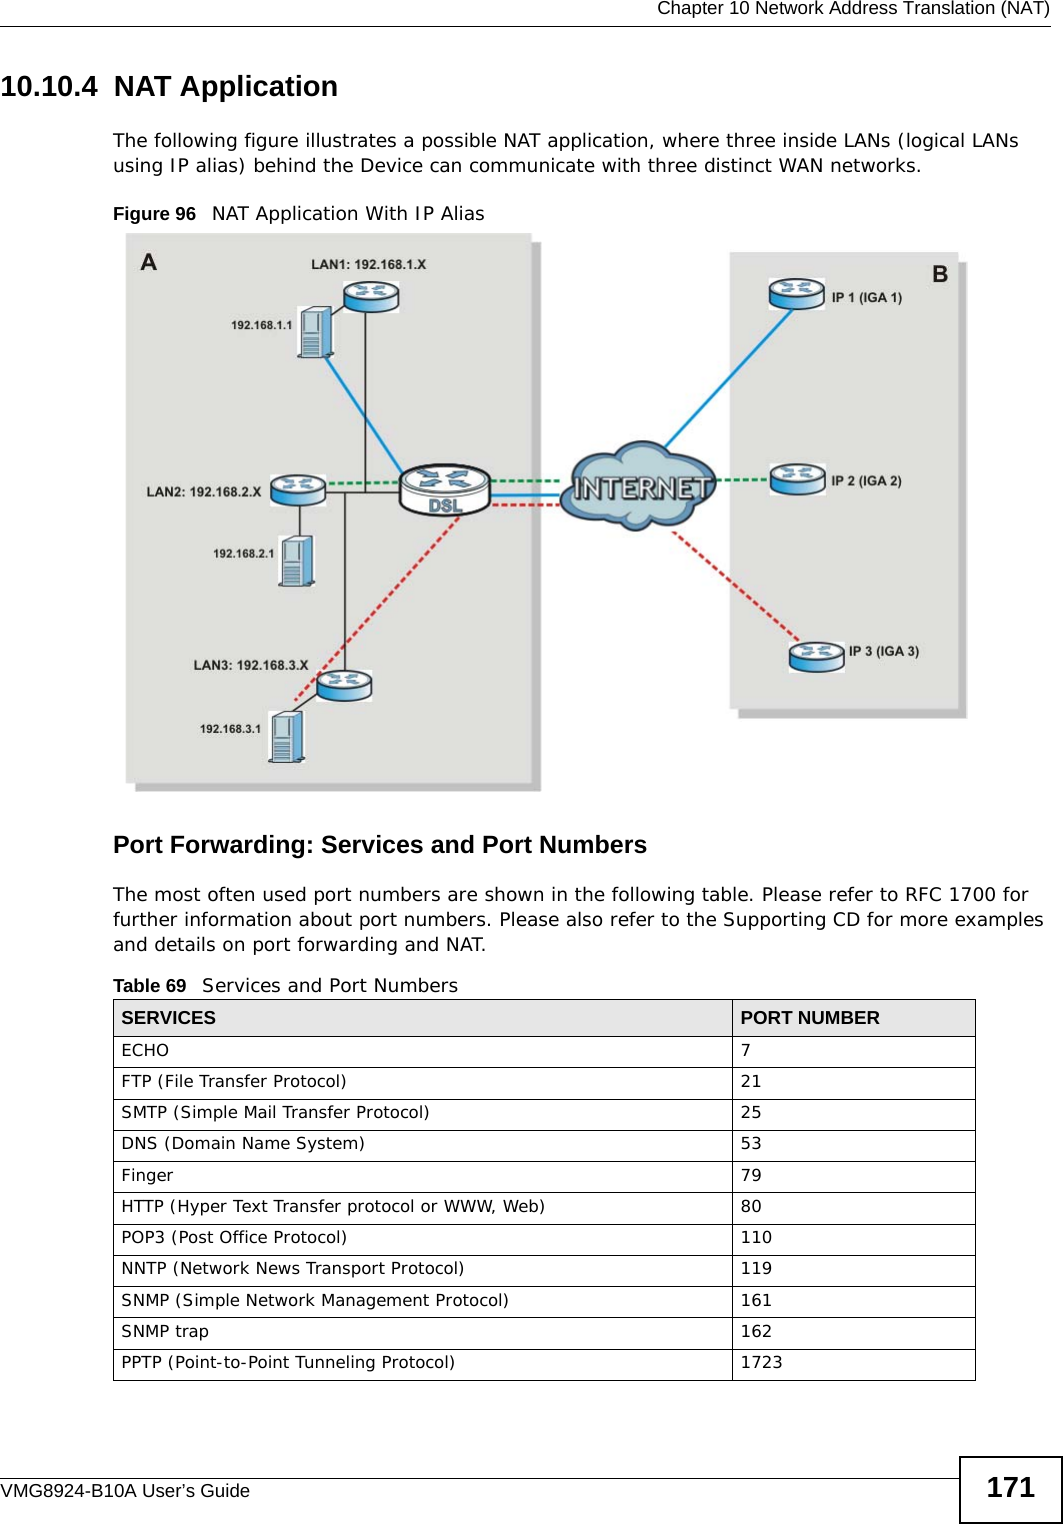  Chapter 10 Network Address Translation (NAT)VMG8924-B10A User’s Guide 17110.10.4  NAT ApplicationThe following figure illustrates a possible NAT application, where three inside LANs (logical LANs using IP alias) behind the Device can communicate with three distinct WAN networks.Figure 96   NAT Application With IP AliasPort Forwarding: Services and Port NumbersThe most often used port numbers are shown in the following table. Please refer to RFC 1700 for further information about port numbers. Please also refer to the Supporting CD for more examples and details on port forwarding and NAT.Table 69   Services and Port NumbersSERVICES PORT NUMBERECHO 7FTP (File Transfer Protocol) 21SMTP (Simple Mail Transfer Protocol) 25DNS (Domain Name System) 53Finger 79HTTP (Hyper Text Transfer protocol or WWW, Web) 80POP3 (Post Office Protocol) 110NNTP (Network News Transport Protocol) 119SNMP (Simple Network Management Protocol) 161SNMP trap 162PPTP (Point-to-Point Tunneling Protocol) 1723